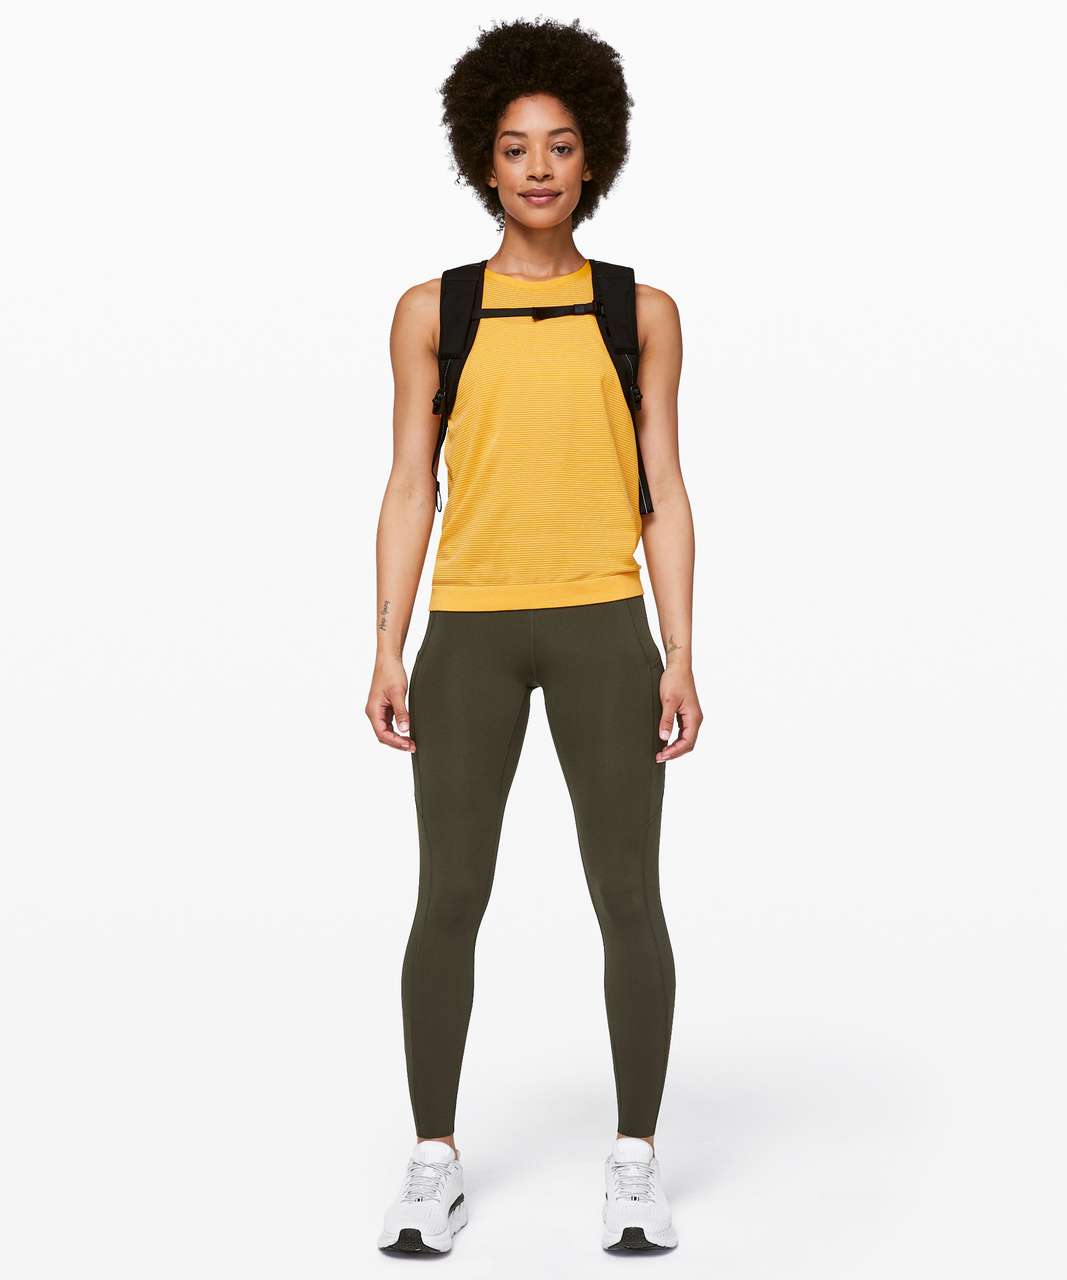 Lululemon Fast and Free Tight 31" *Non-Reflective - Dark Olive